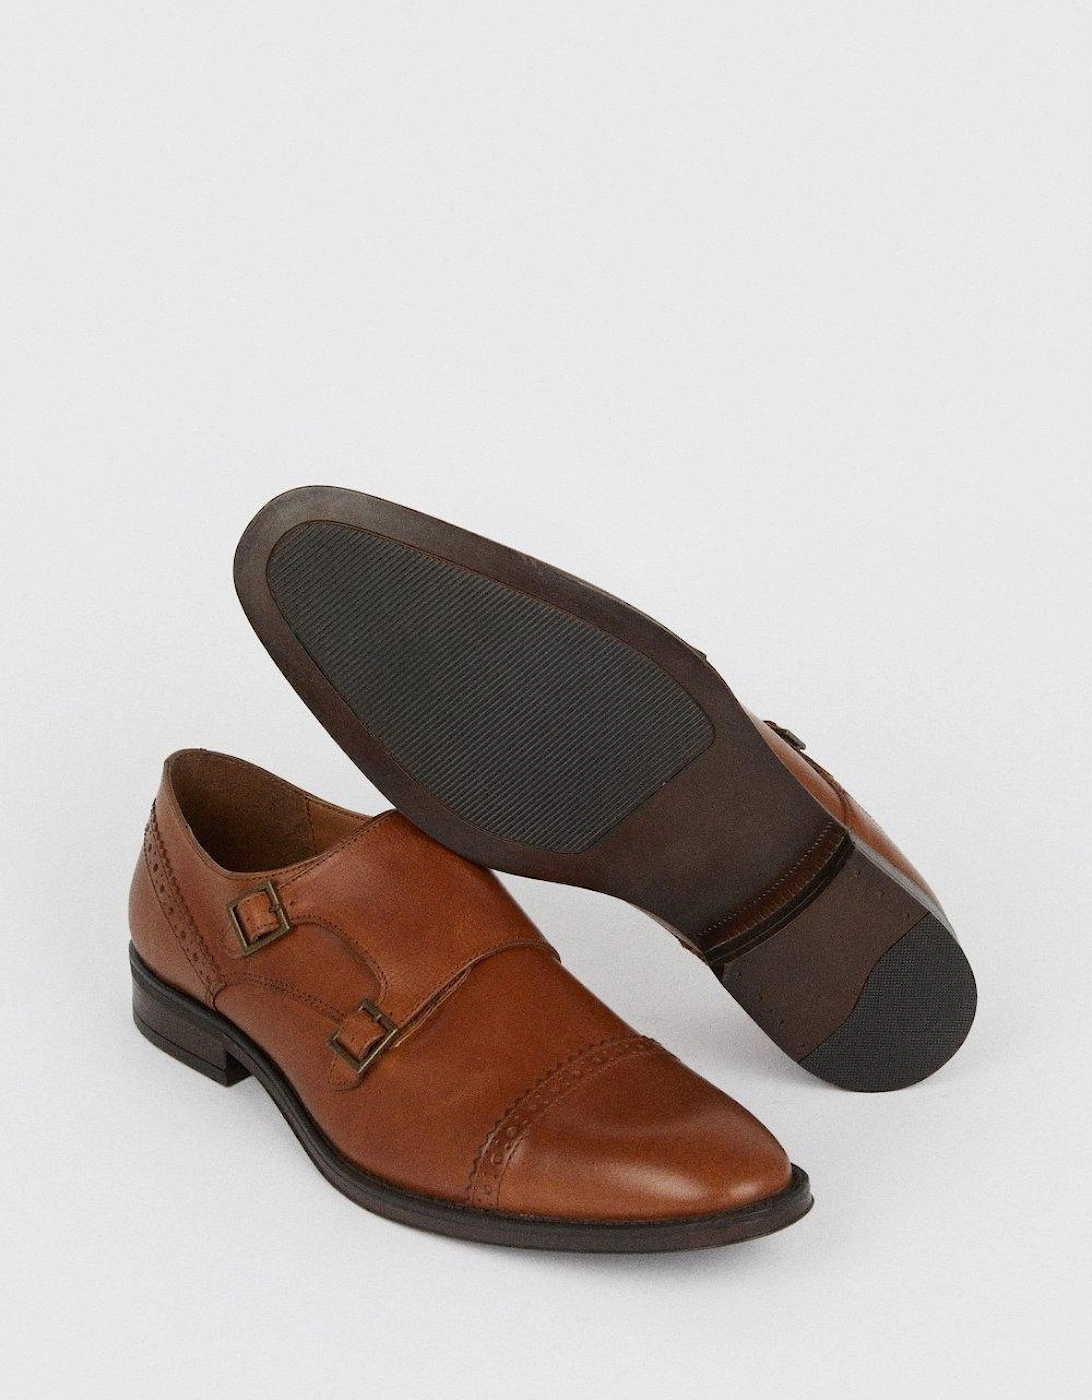 Mens Leather Brogues